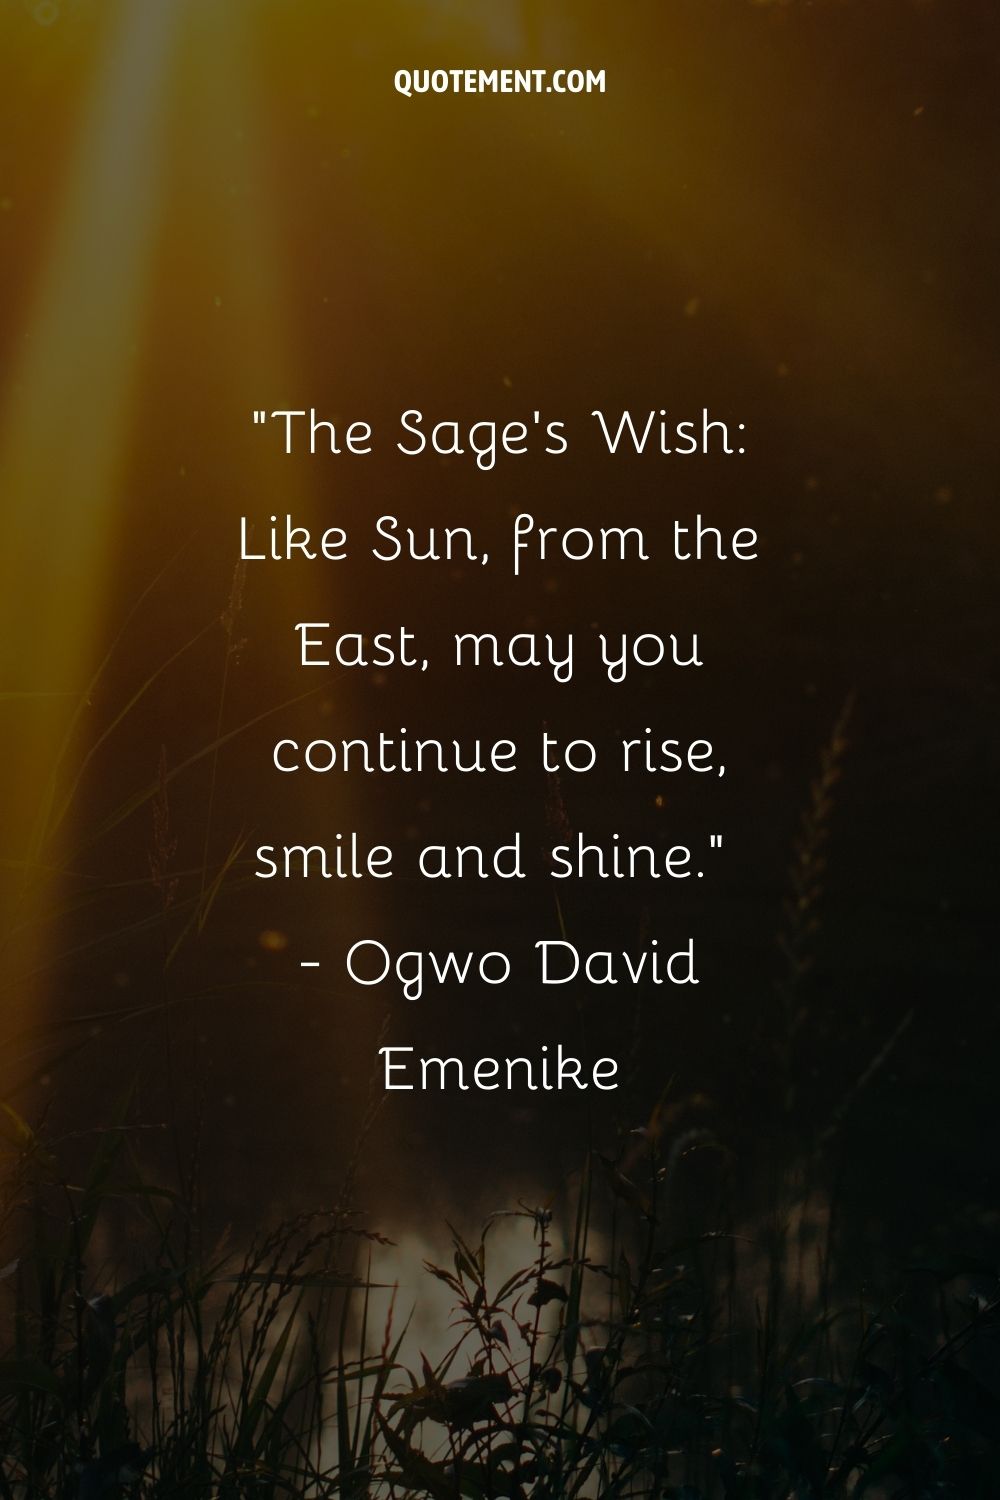 The Sage's Wish Like Sun, from the East, may you continue to rise, smile and shine.